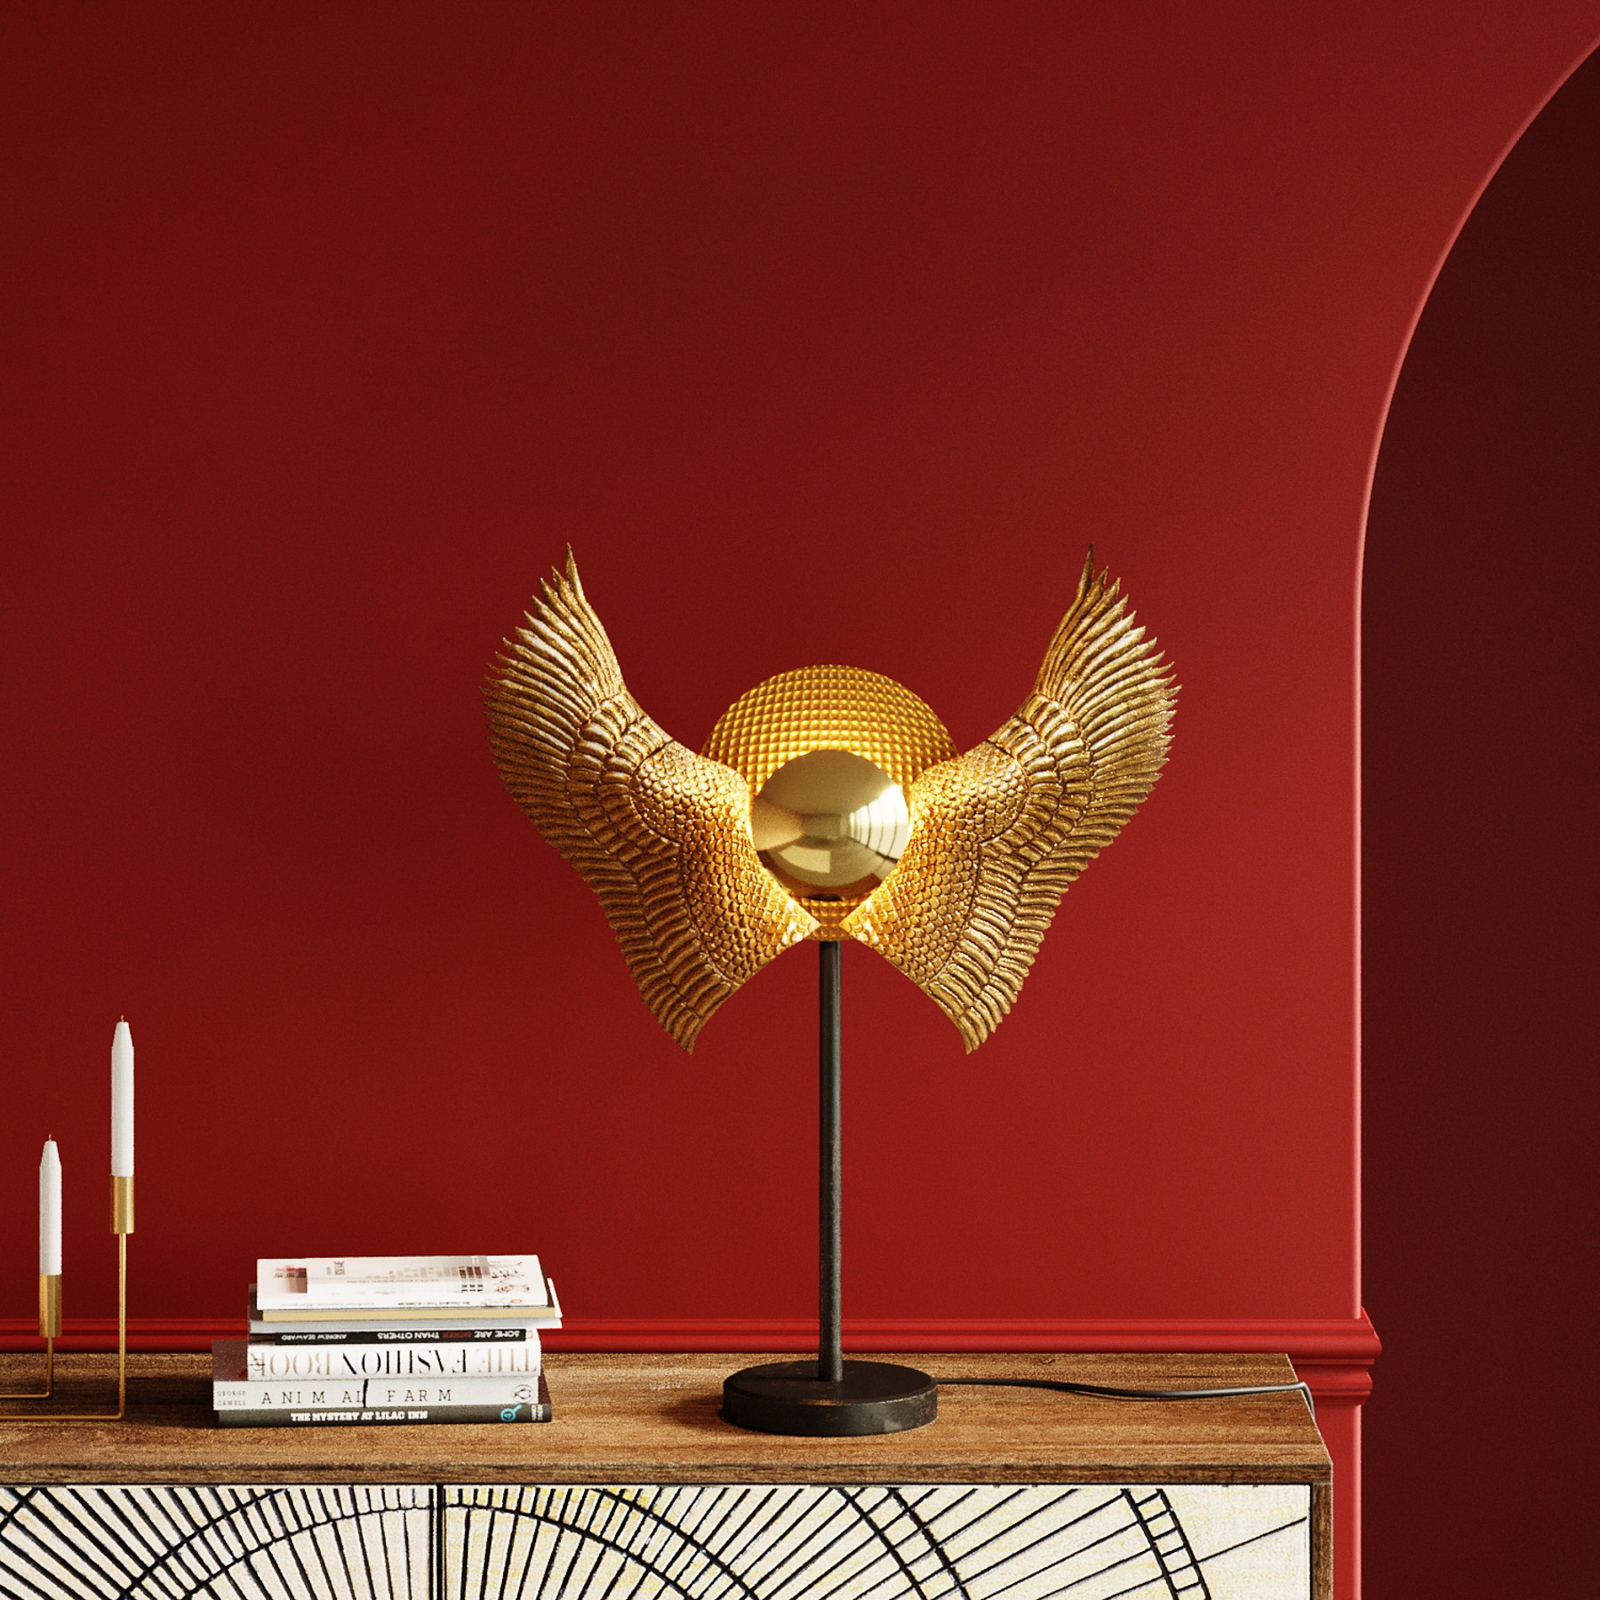 KARE Bird Wings table lamp, brass-coated